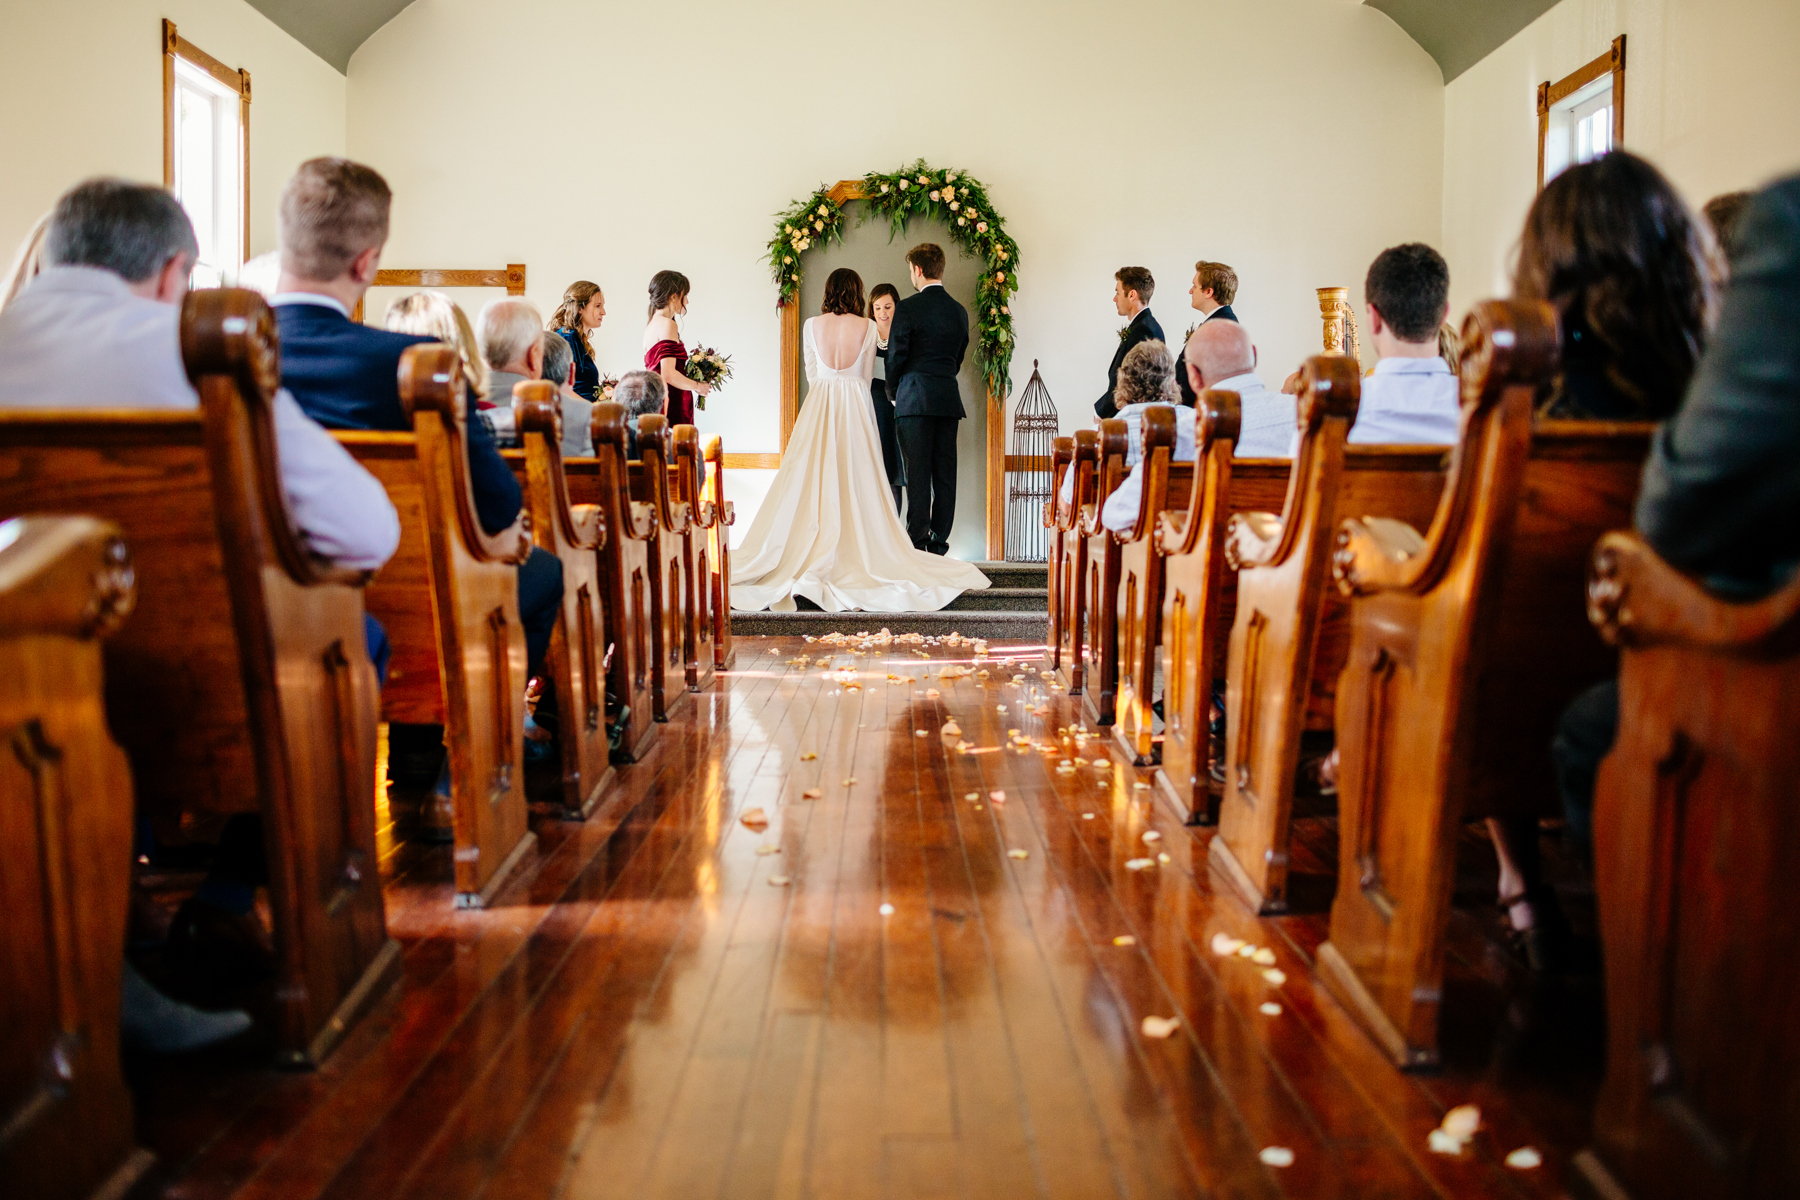 Wedding ceremony inside the chapel at the felt mansion